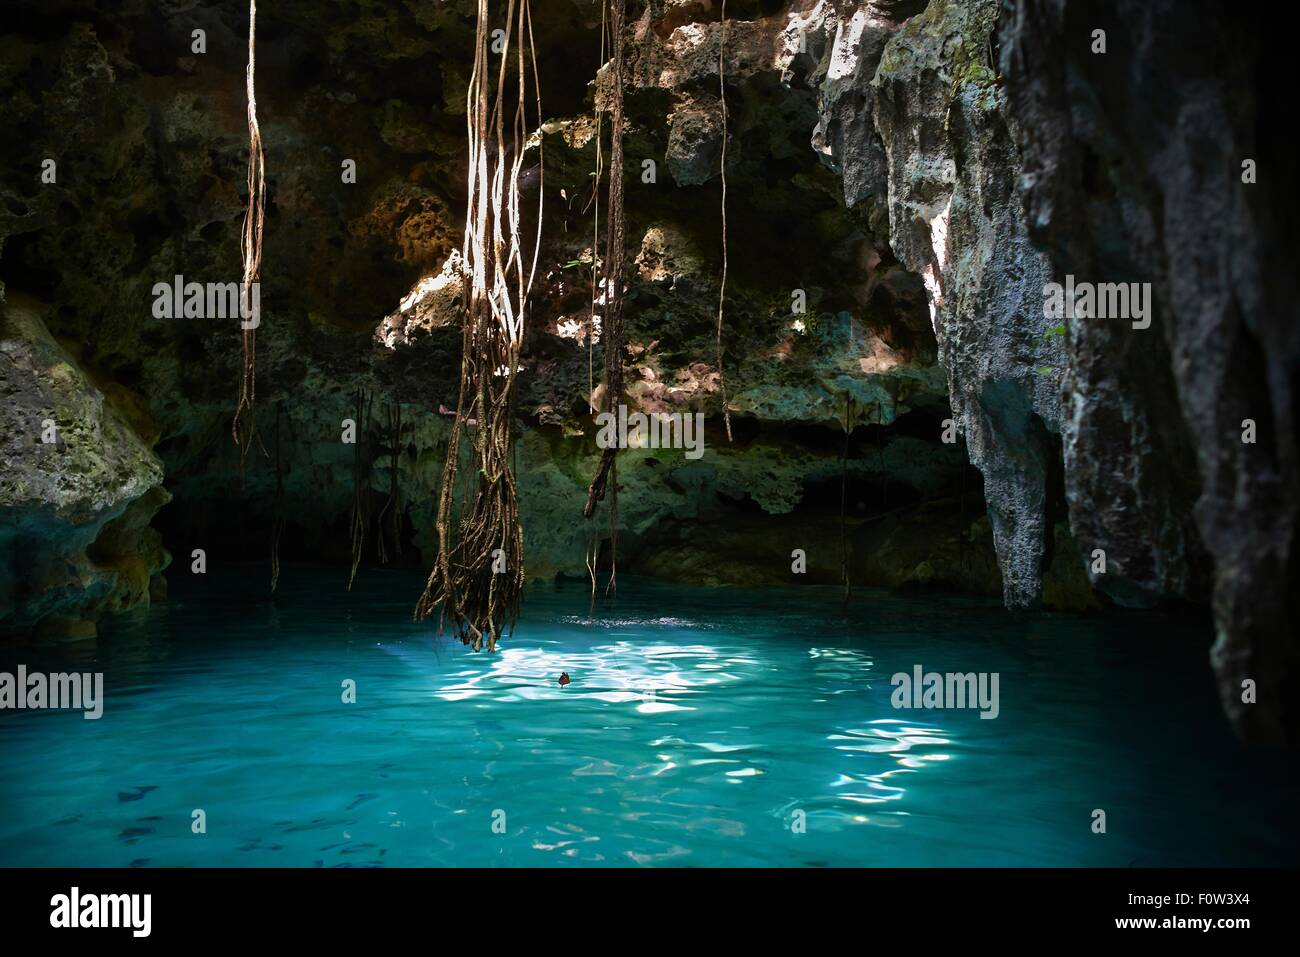 Cave and water scene from cenote, Mexico Stock Photo